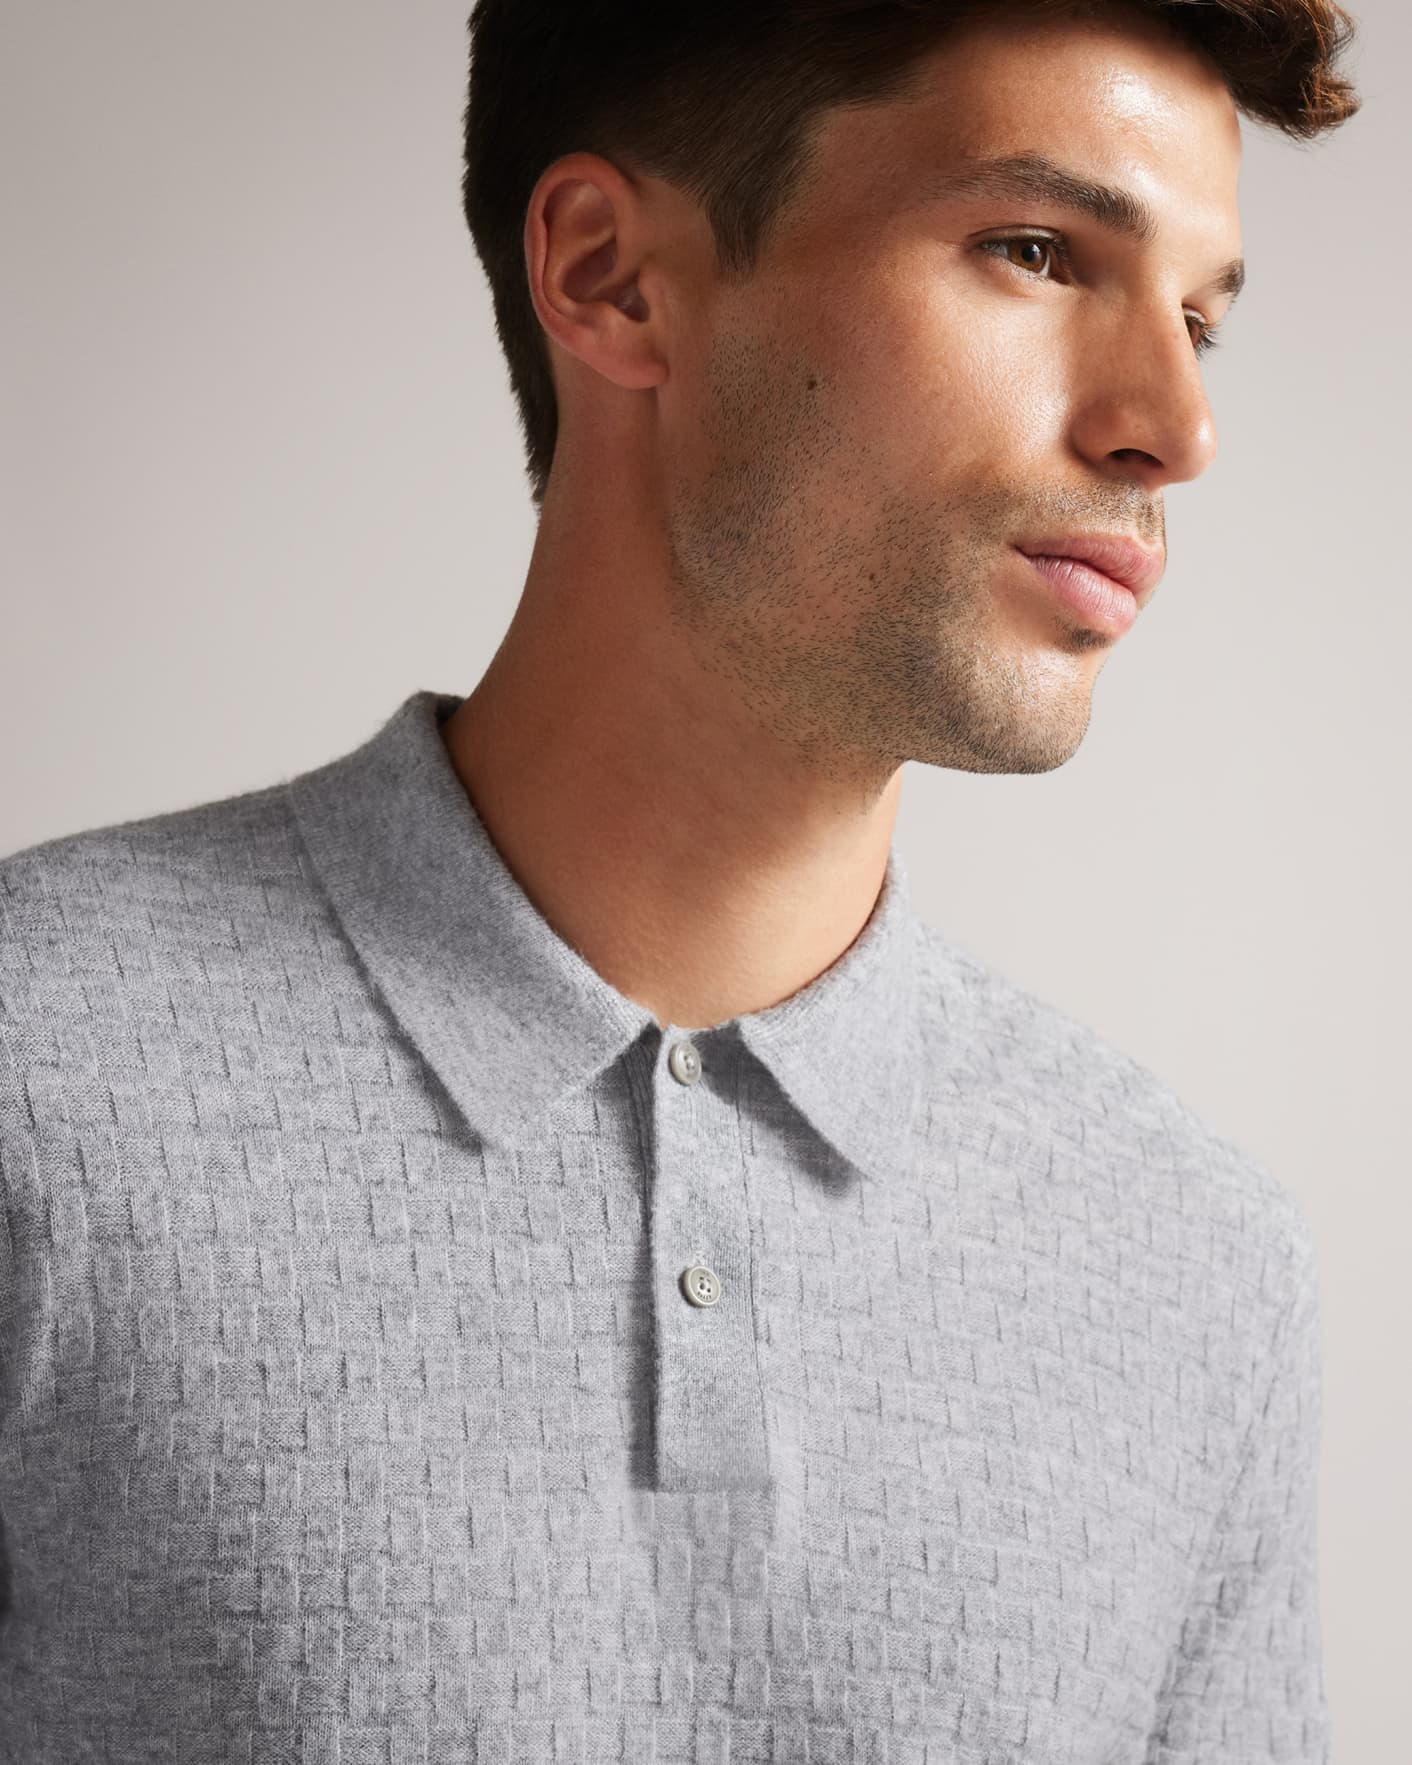 Gray Marl Long Sleeve Knitted Polo Shirt Ted Baker